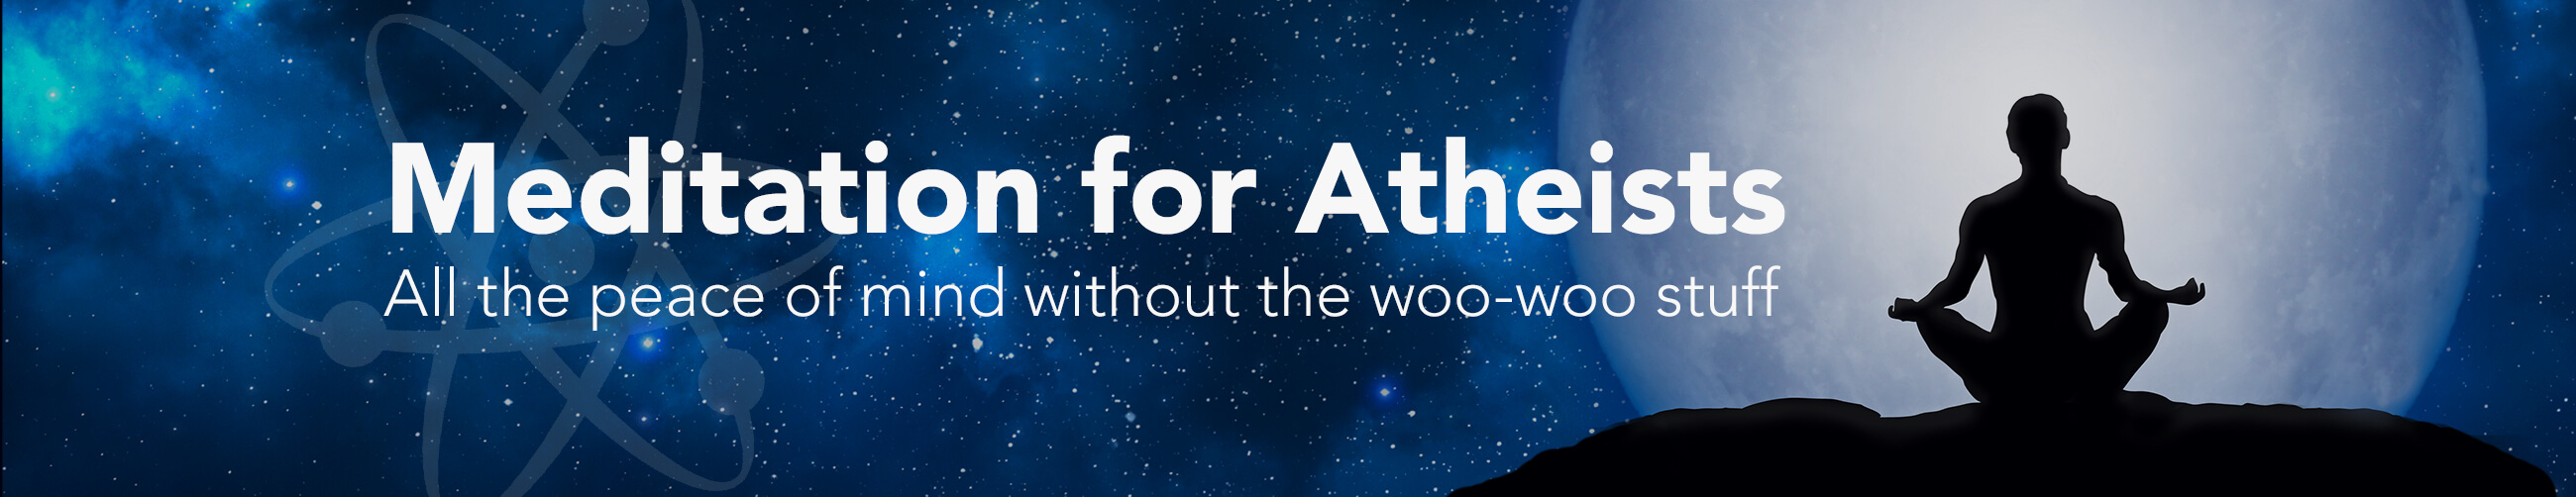 Meditation for Atheists, All the peace of mind without the woo-woo stuff